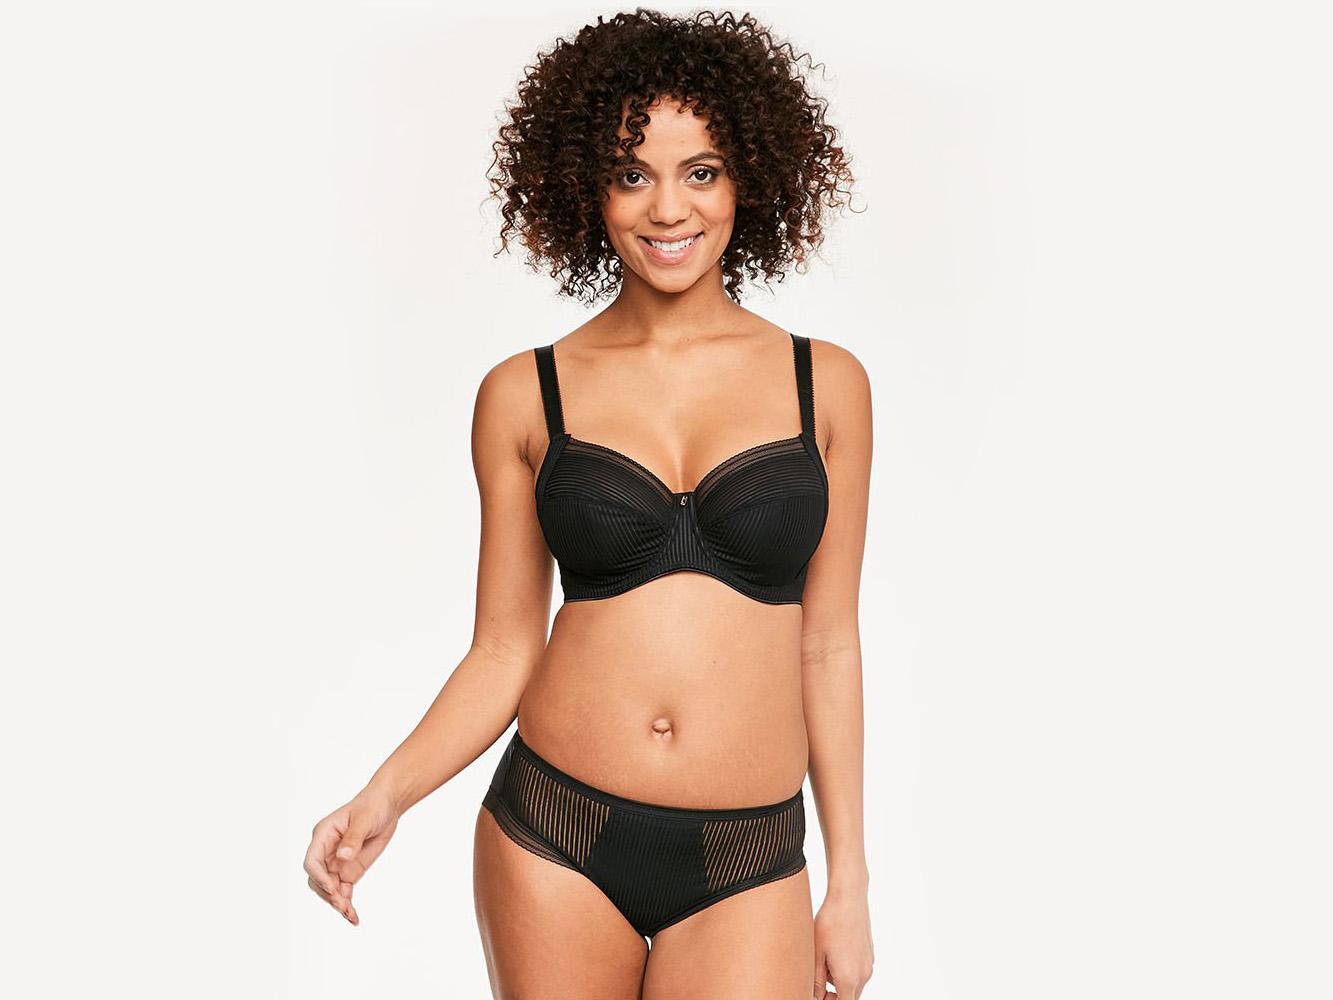 National Underwear Day: Five different bra types explained